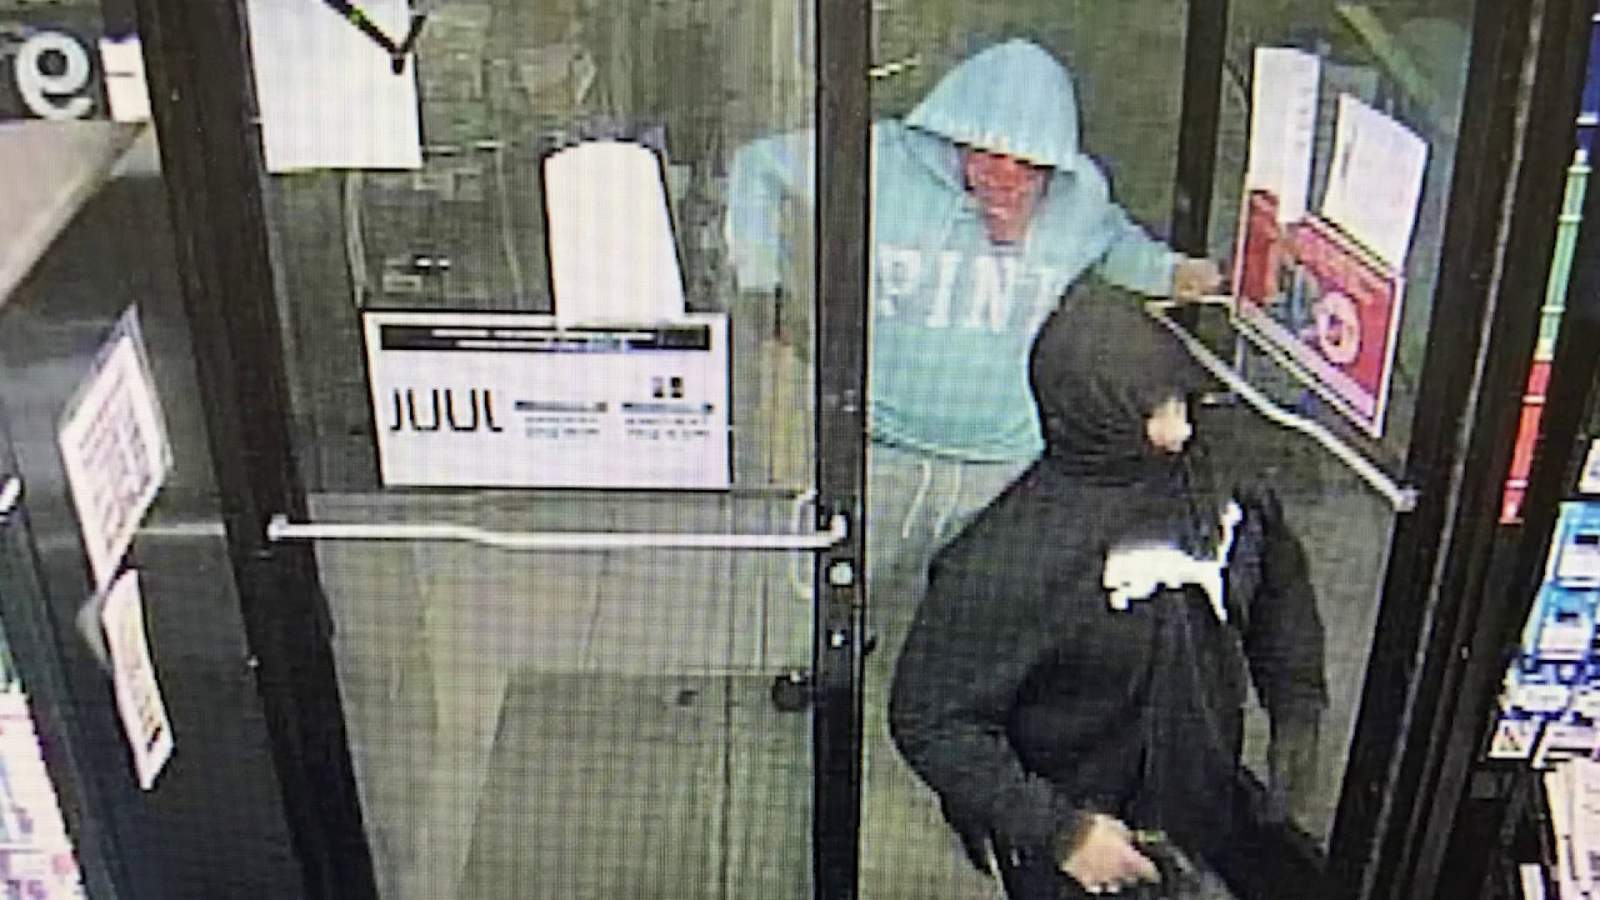 Police release photos of men believed to be behind string of robberies in San Antonio area